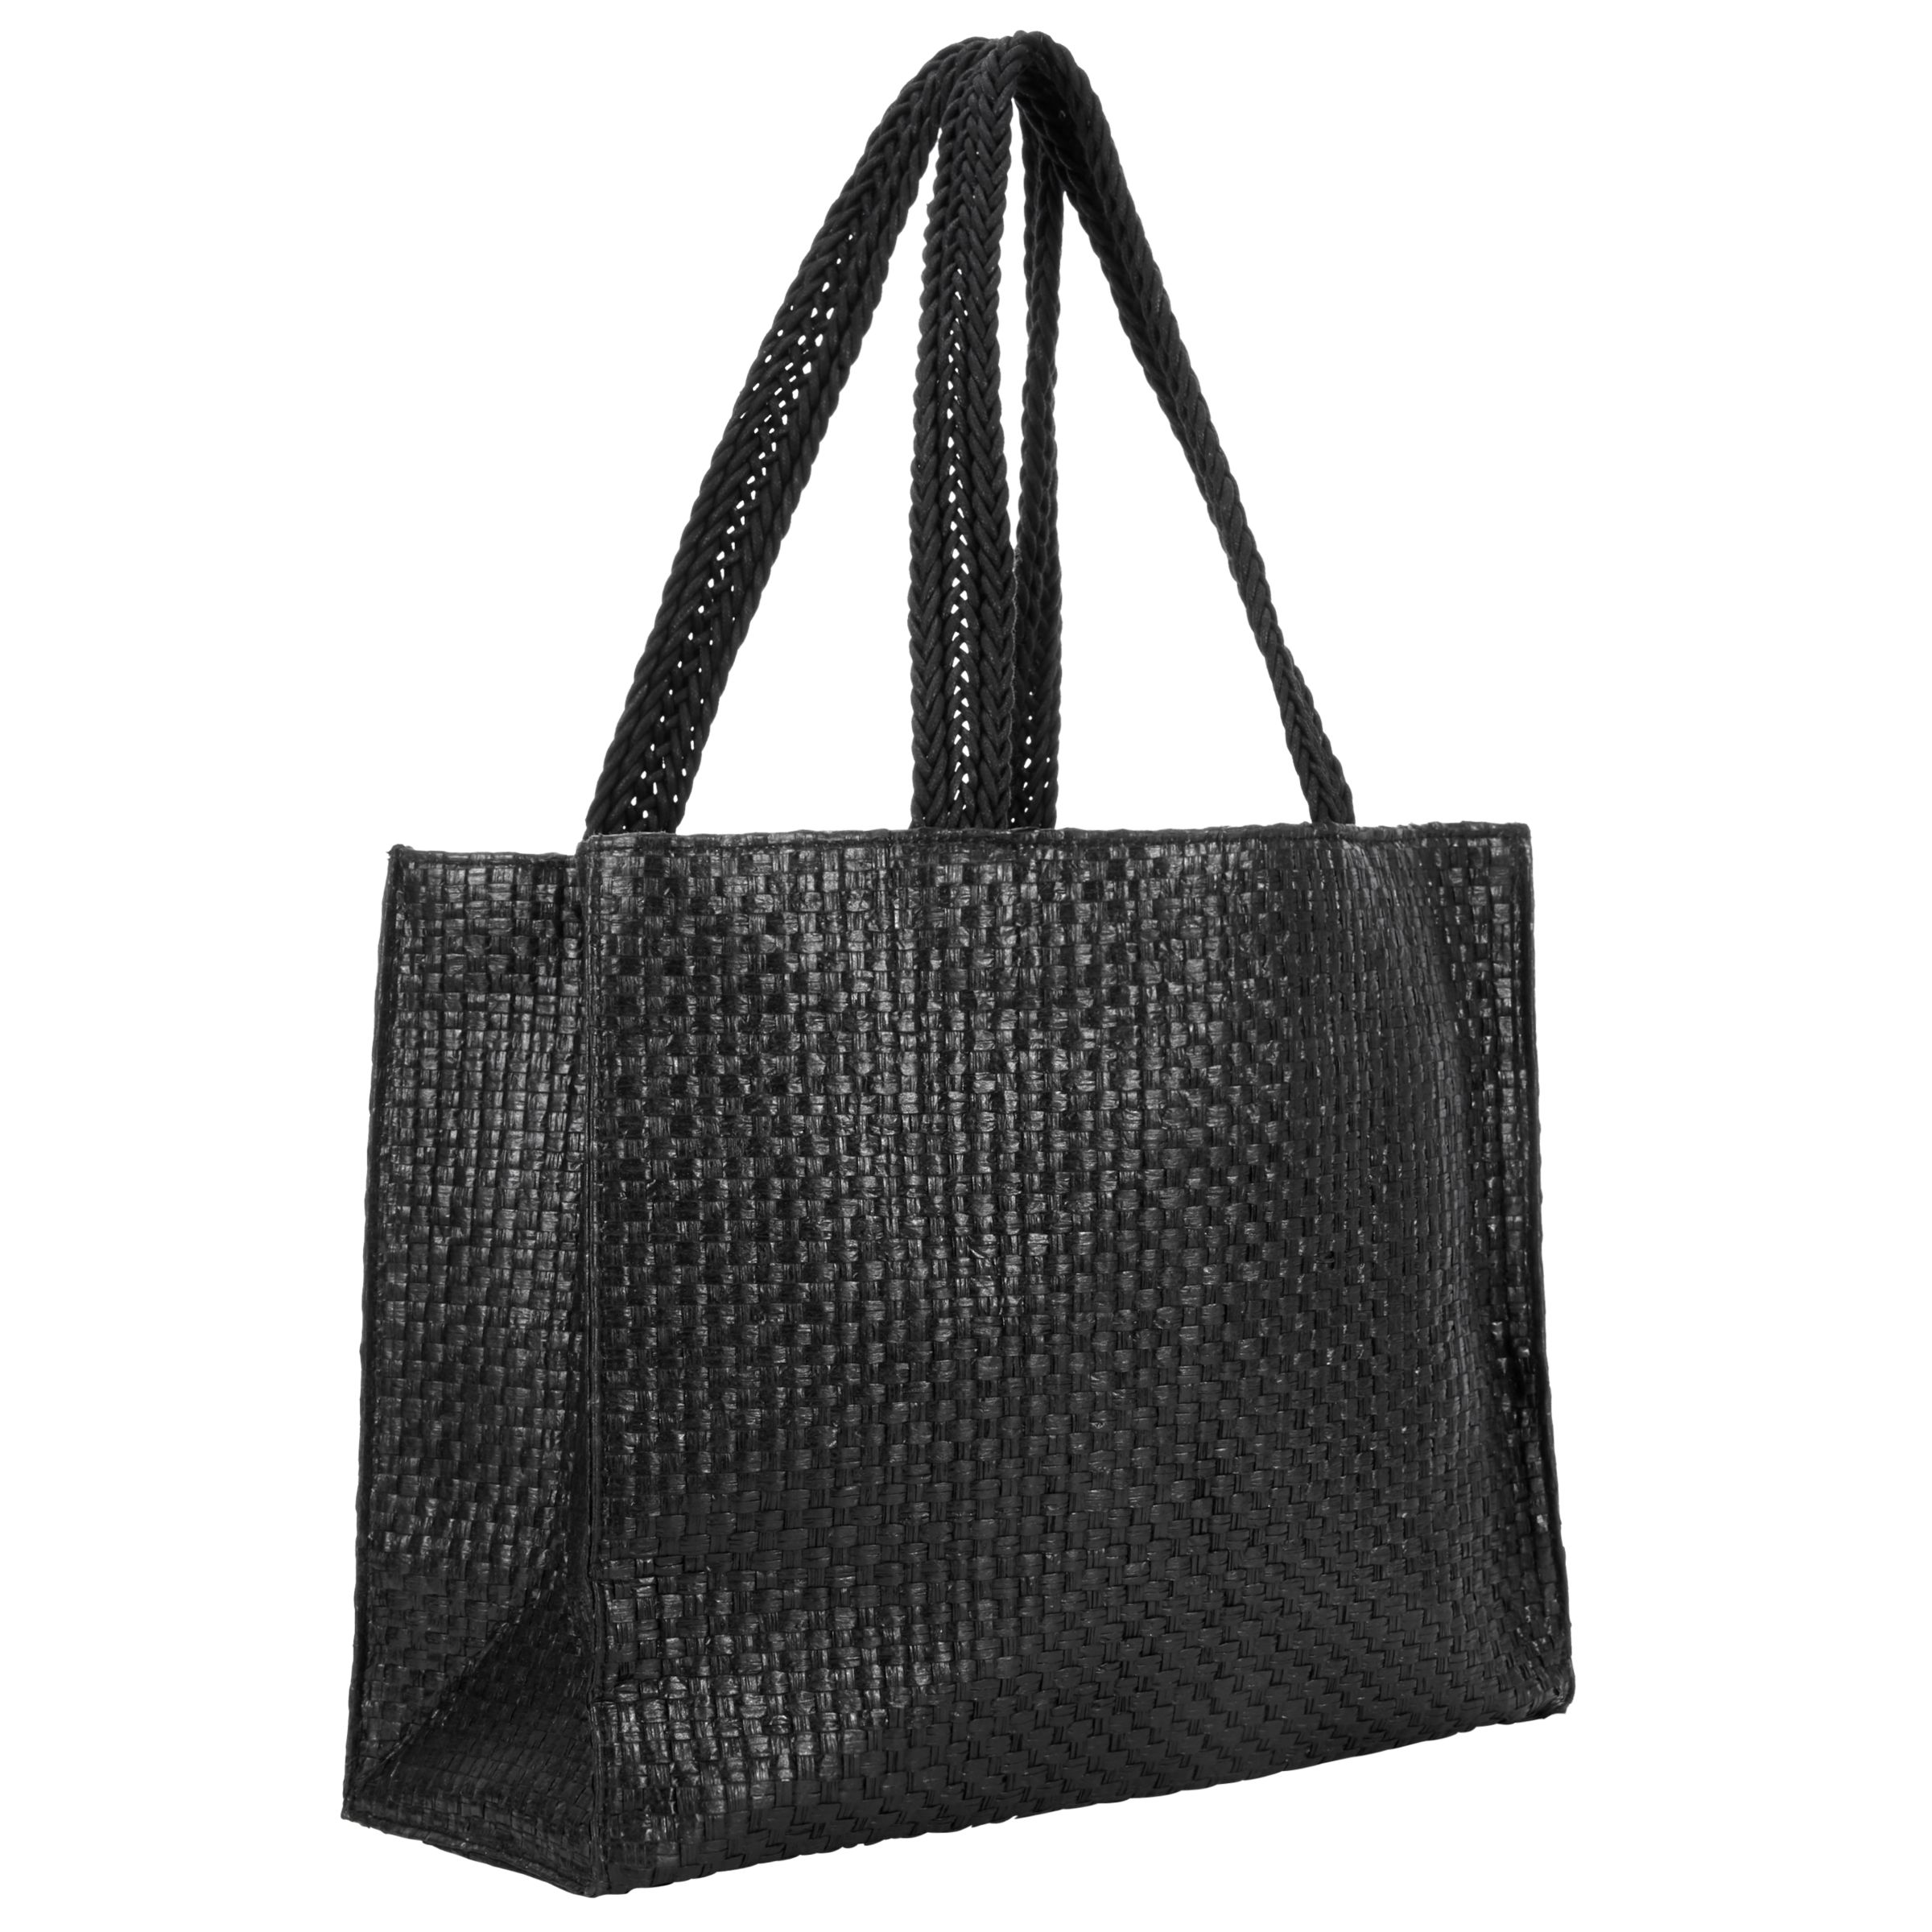 Collection WEEKEND by John Lewis Straw Shopper Bag, Black at John Lewis & Partners